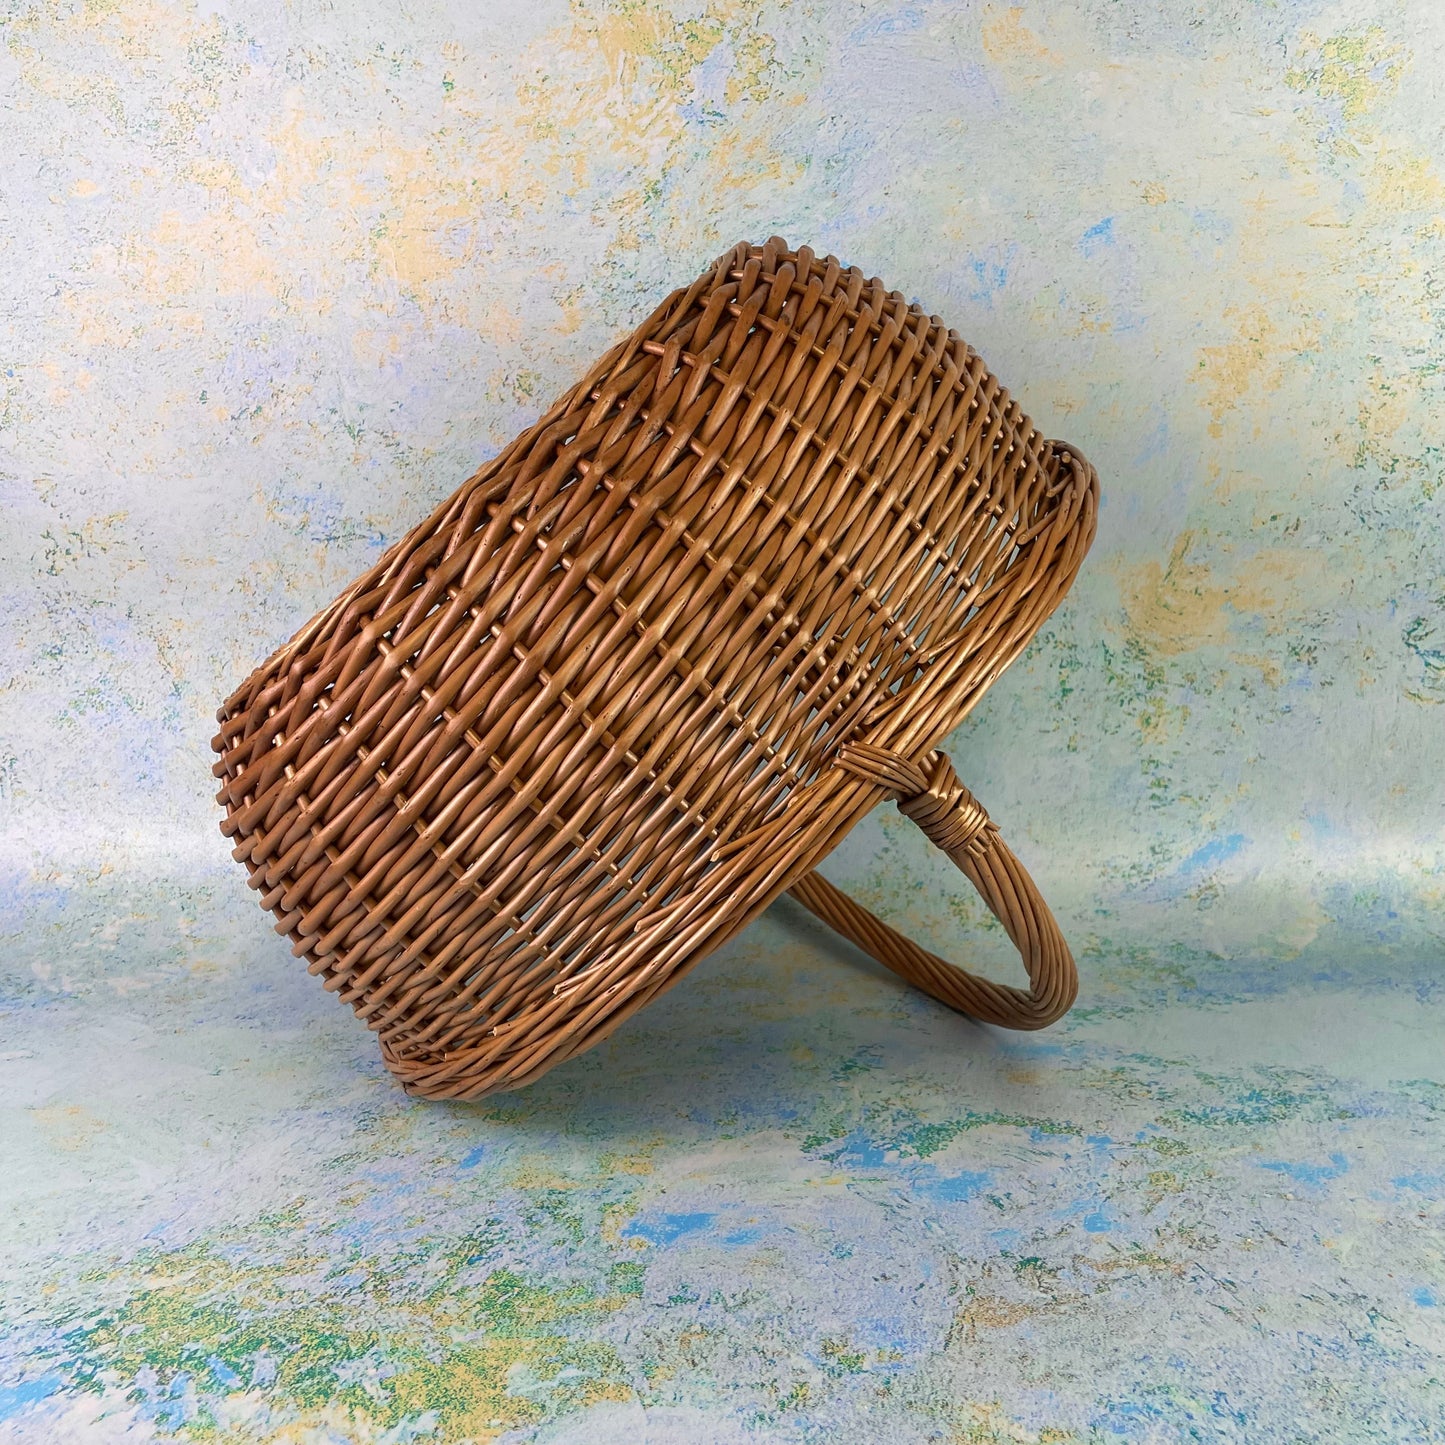 Deluxe Willow Shopping Basket